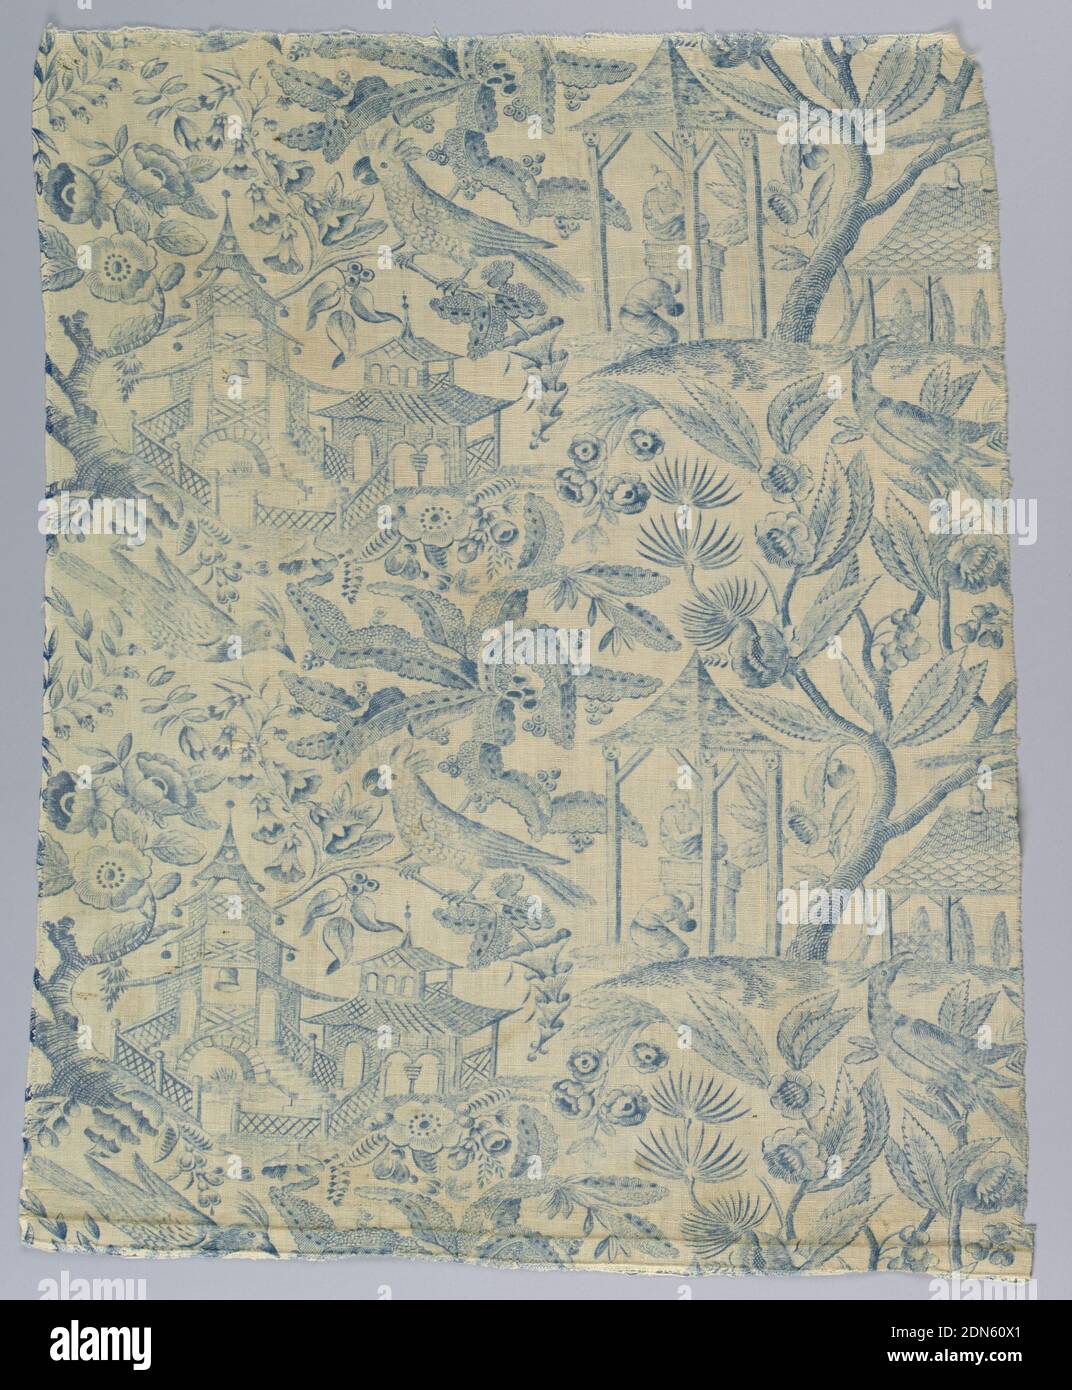 Textile, Medium: cotton Technique: roller printed on plain weave, Pattern of chinoiserie type; with pagodas, male figures, and birds amid foliage. At top piece is gathered into band and fitted with tapes, possibly for a valance., England, mid-19th century, printed, dyed & painted textiles, Textile Stock Photo